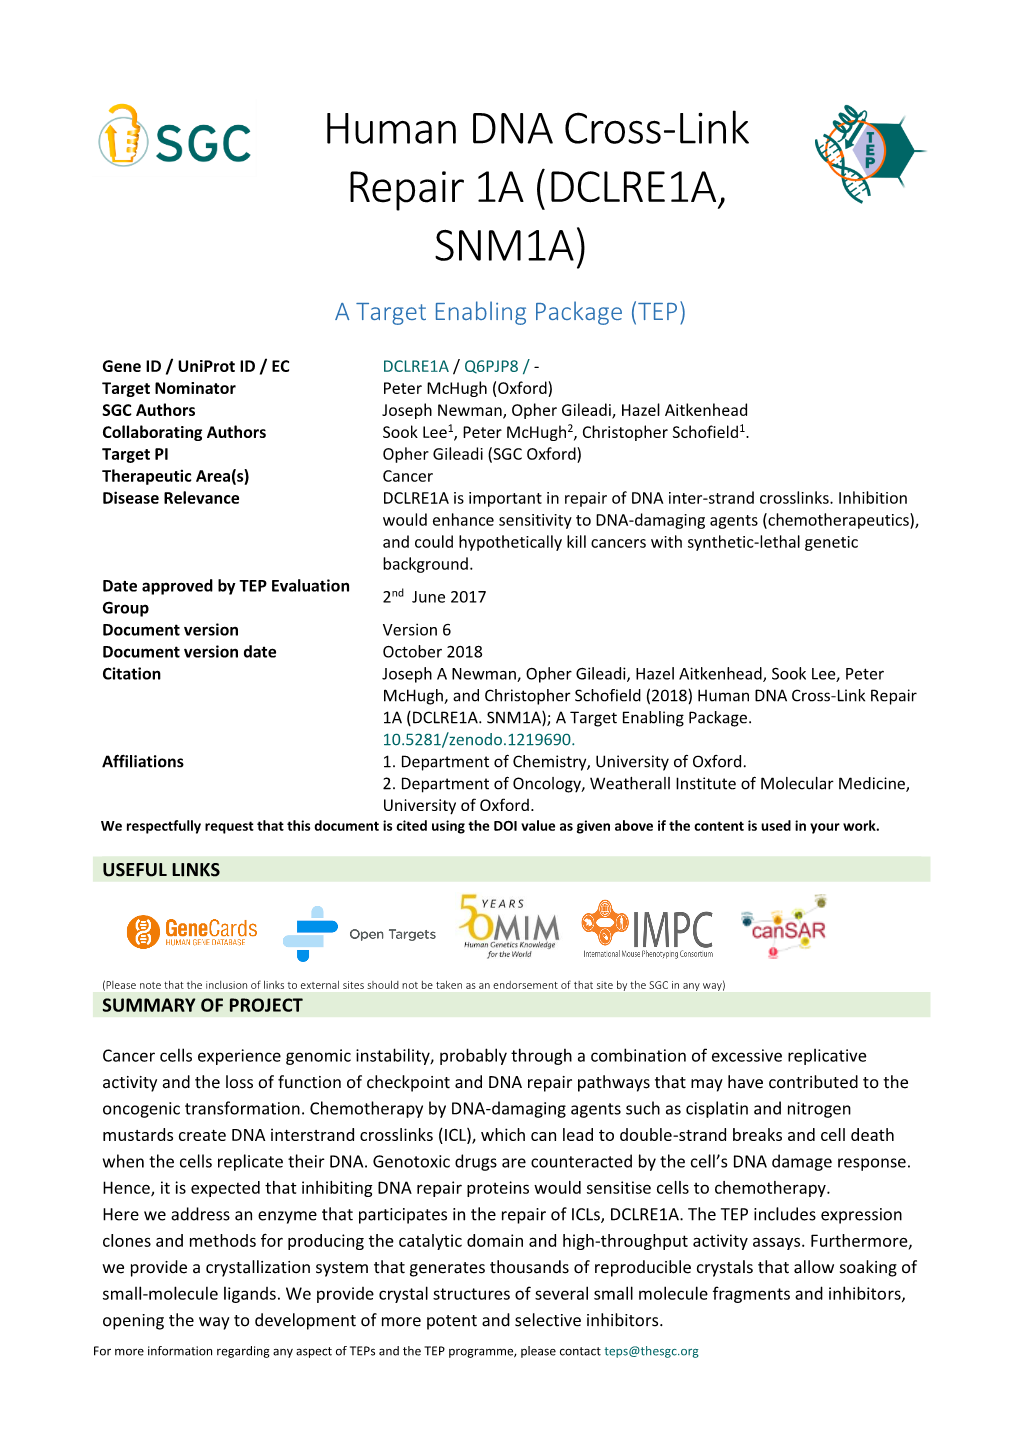 DCLRE1A, SNM1A) a Target Enabling Package (TEP)